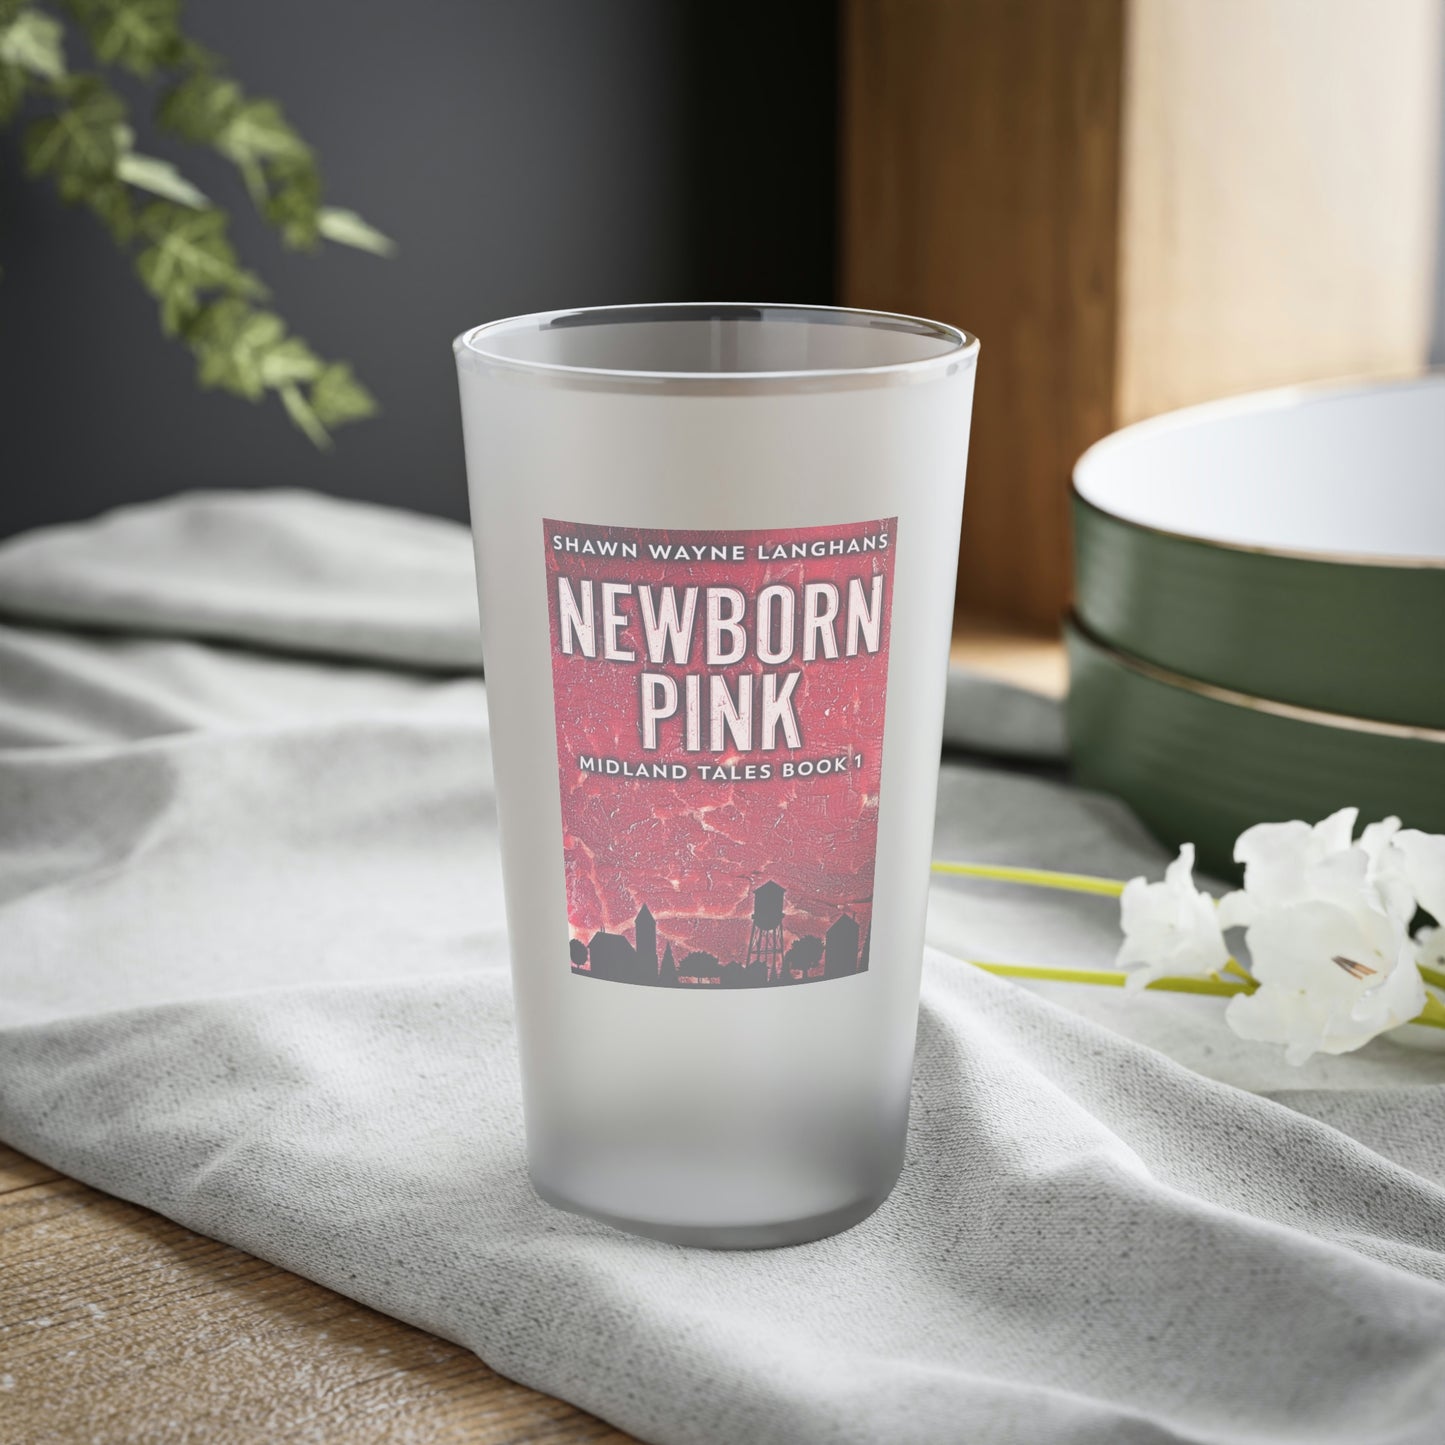 Newborn Pink - Frosted Pint Glass